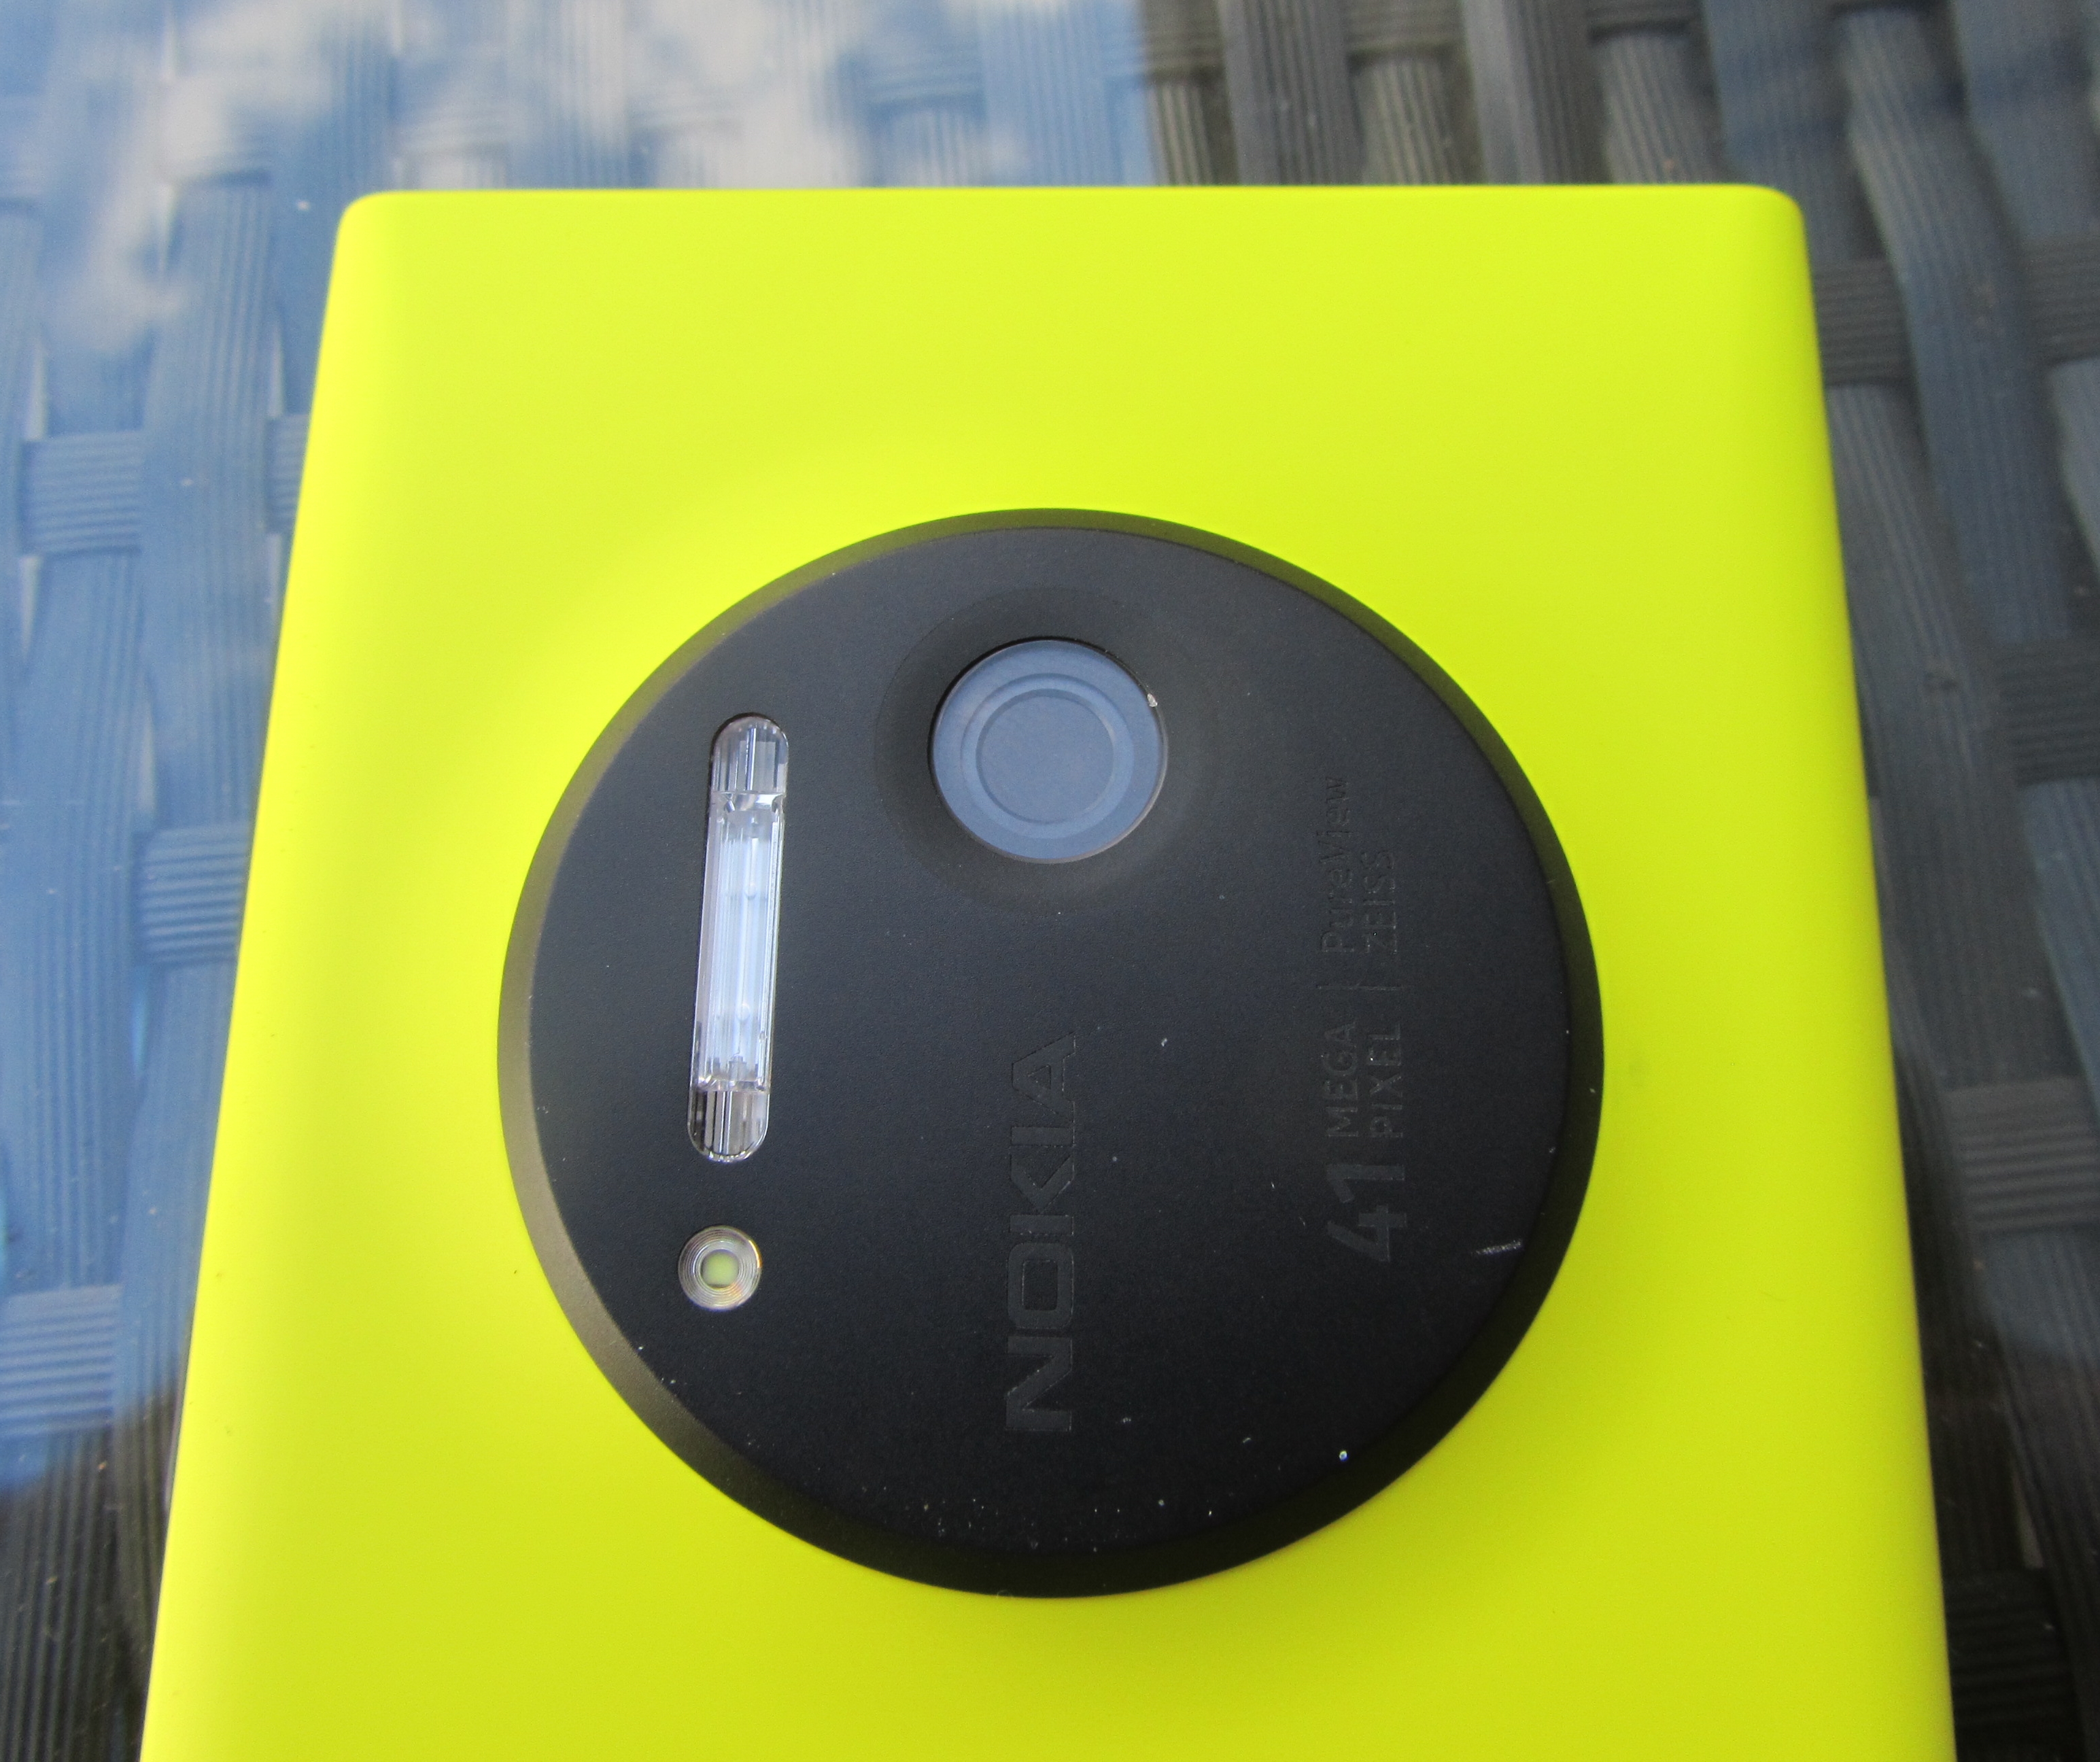 1020 camera Nokia Lumia 1020 review: The best camera phone, but not the best smartphone